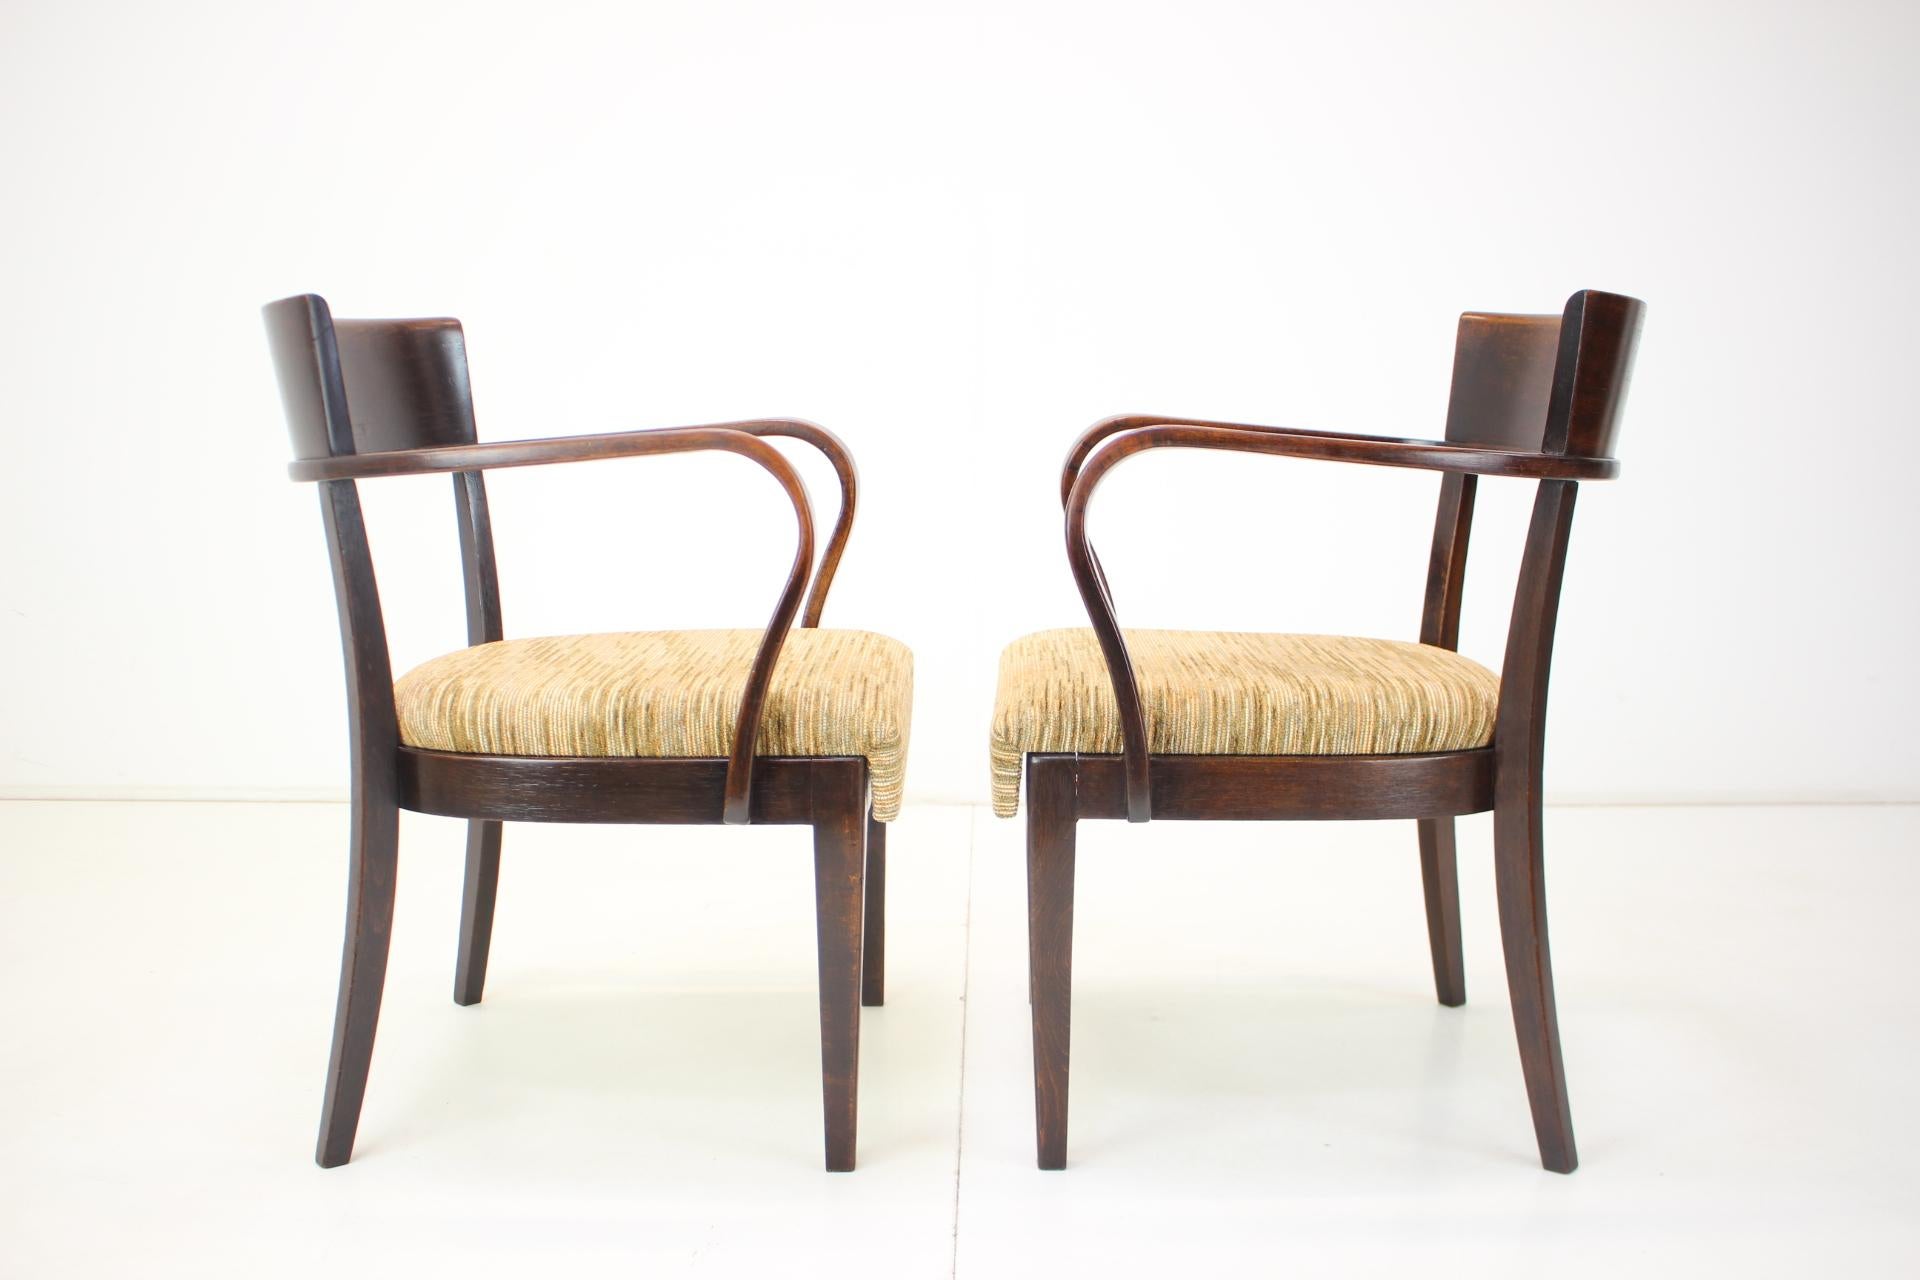 Mid-20th Century Rare Set of Four Catalog Chairs H-224 by Jindřich Halabala 1930s, Czechoslovakia For Sale